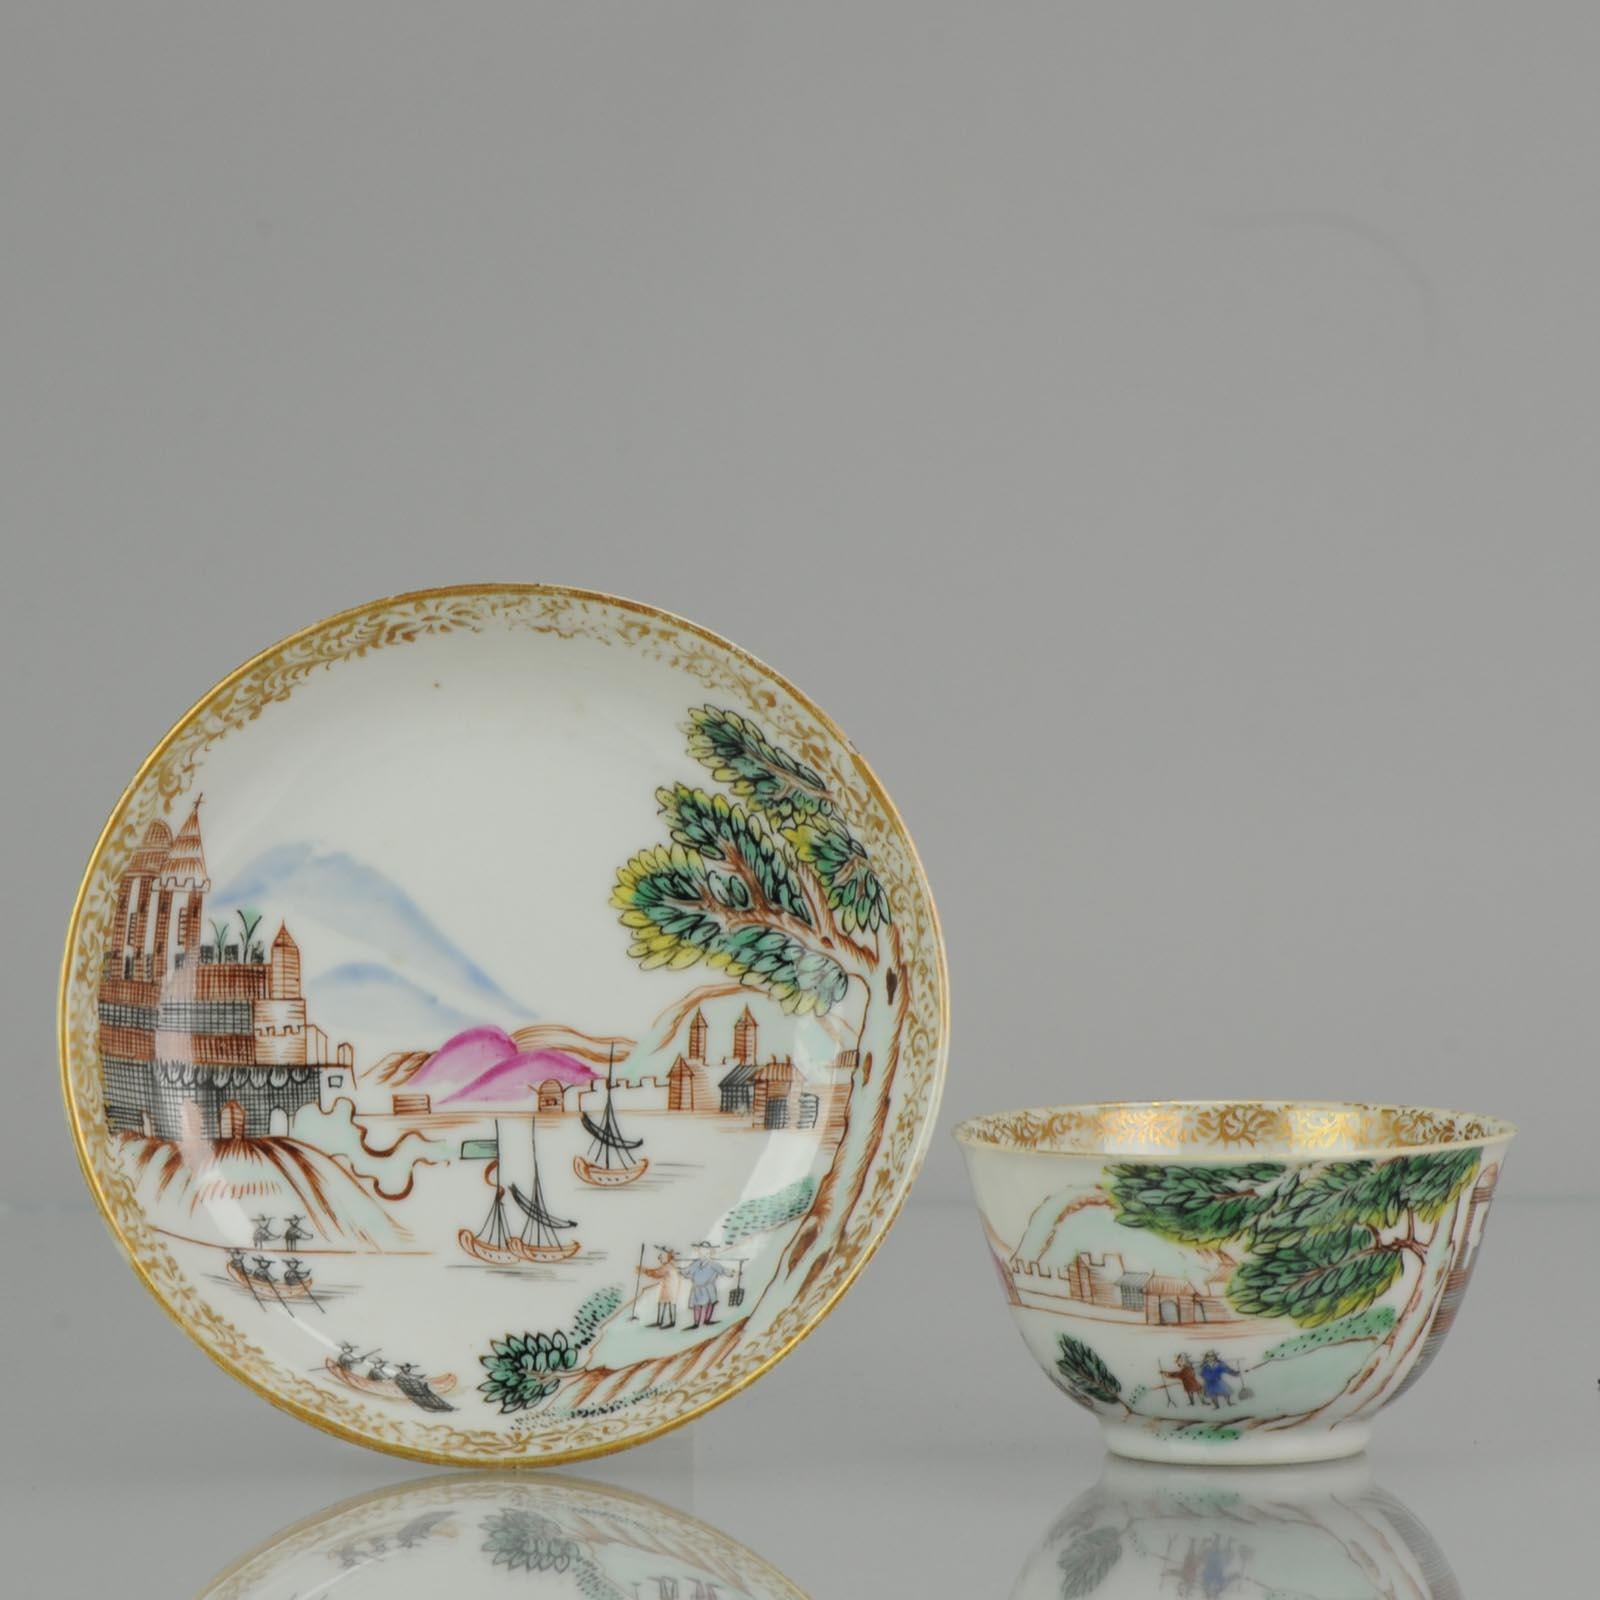 Qing 18th Century Antique Rare Cup Saucer Chine De Commande, Western Subjects Meissen For Sale